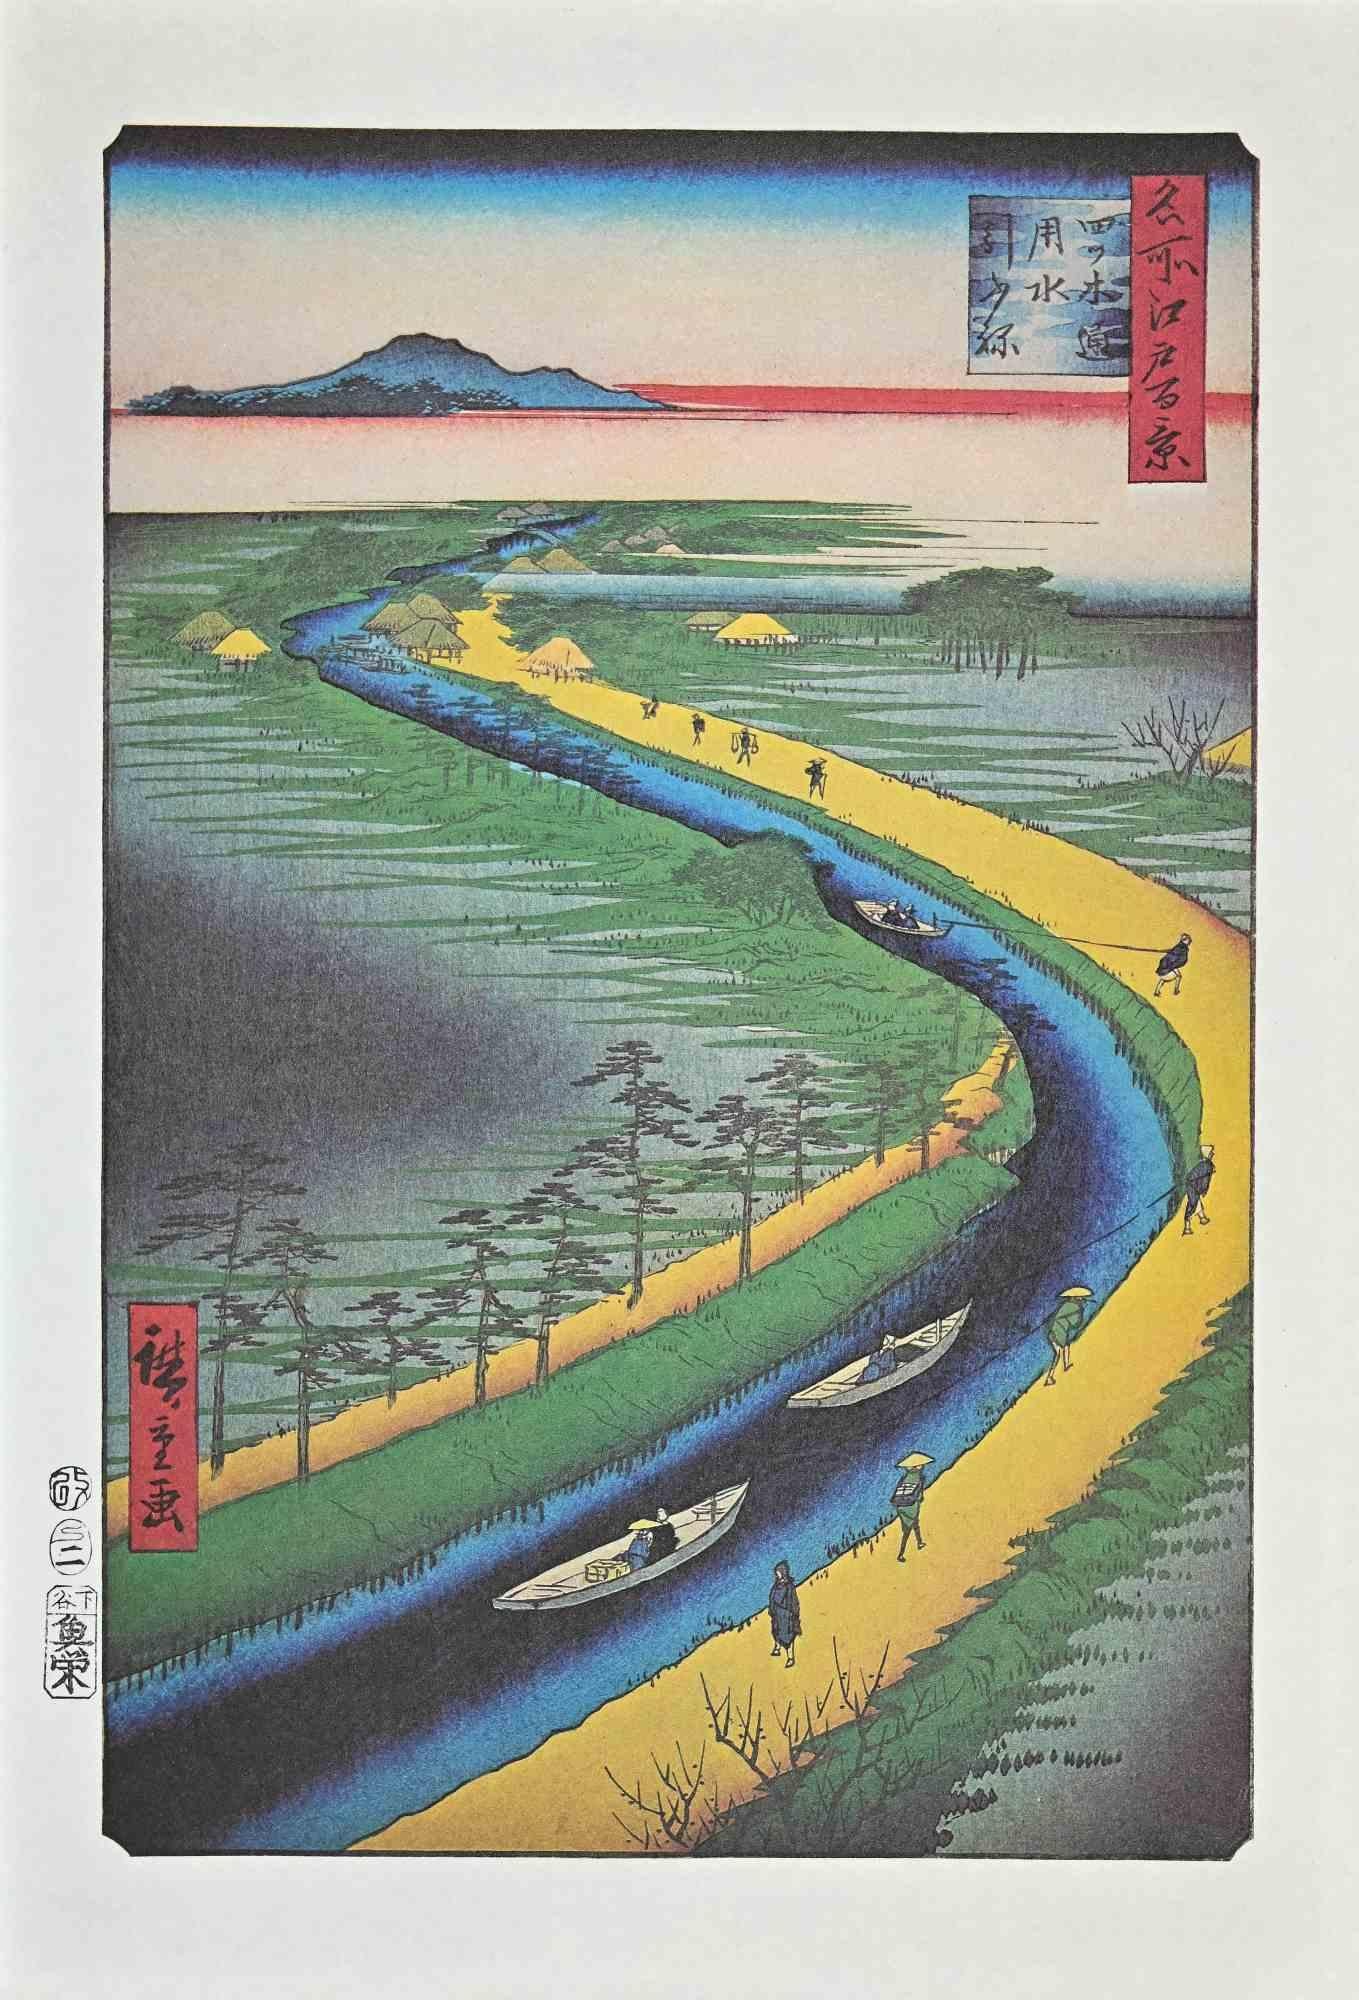 The Japanese landscape is a modern artwork realized in the Mid-20th Century.

Mixed colored lithograph after a woodcut realized by the great Japanese artist Utagawa Hiroshige in the 19th century.

Very Good conditions.

Collect an oriental